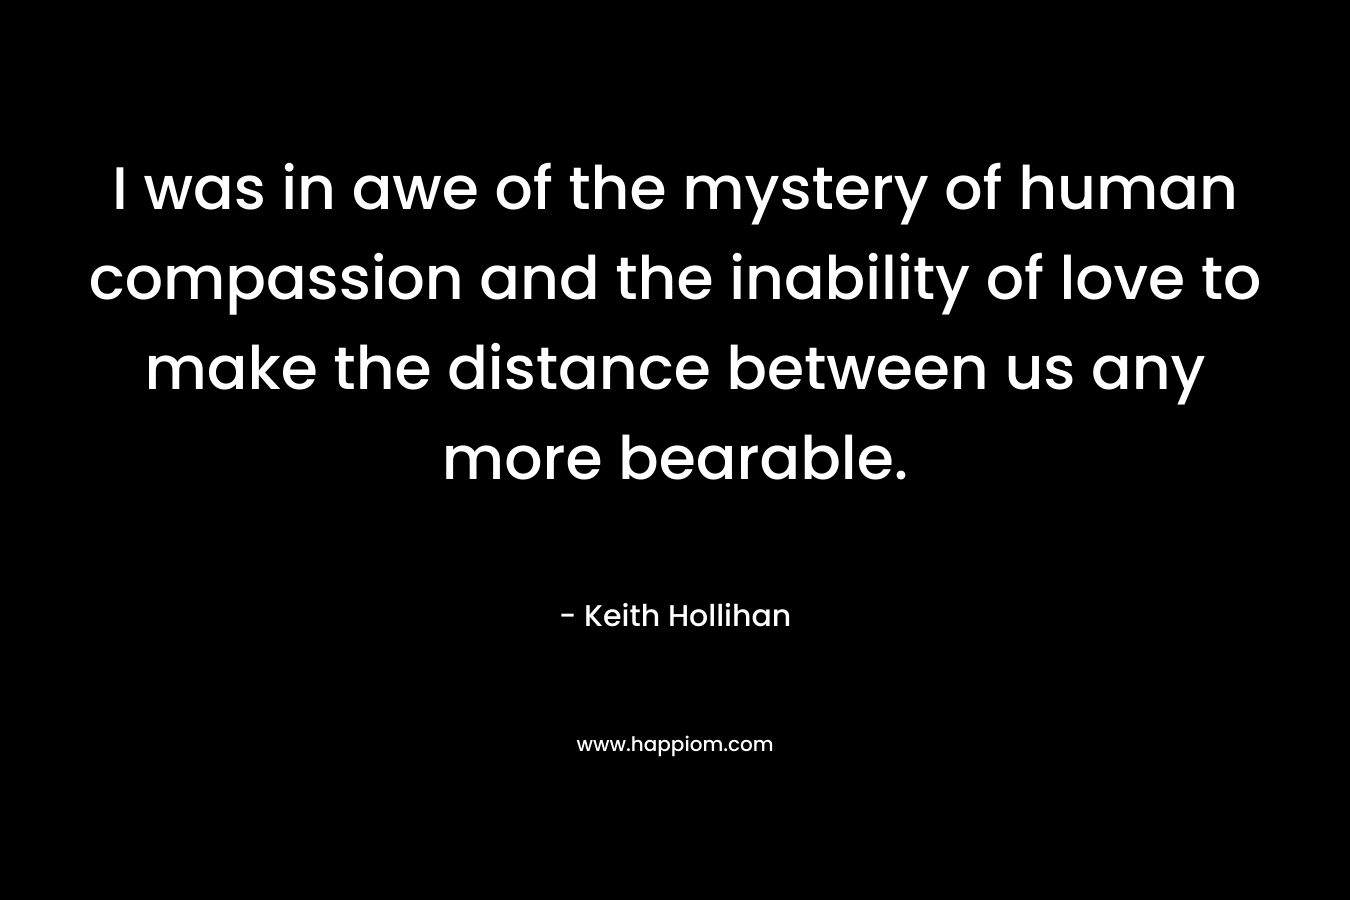 I was in awe of the mystery of human compassion and the inability of love to make the distance between us any more bearable.